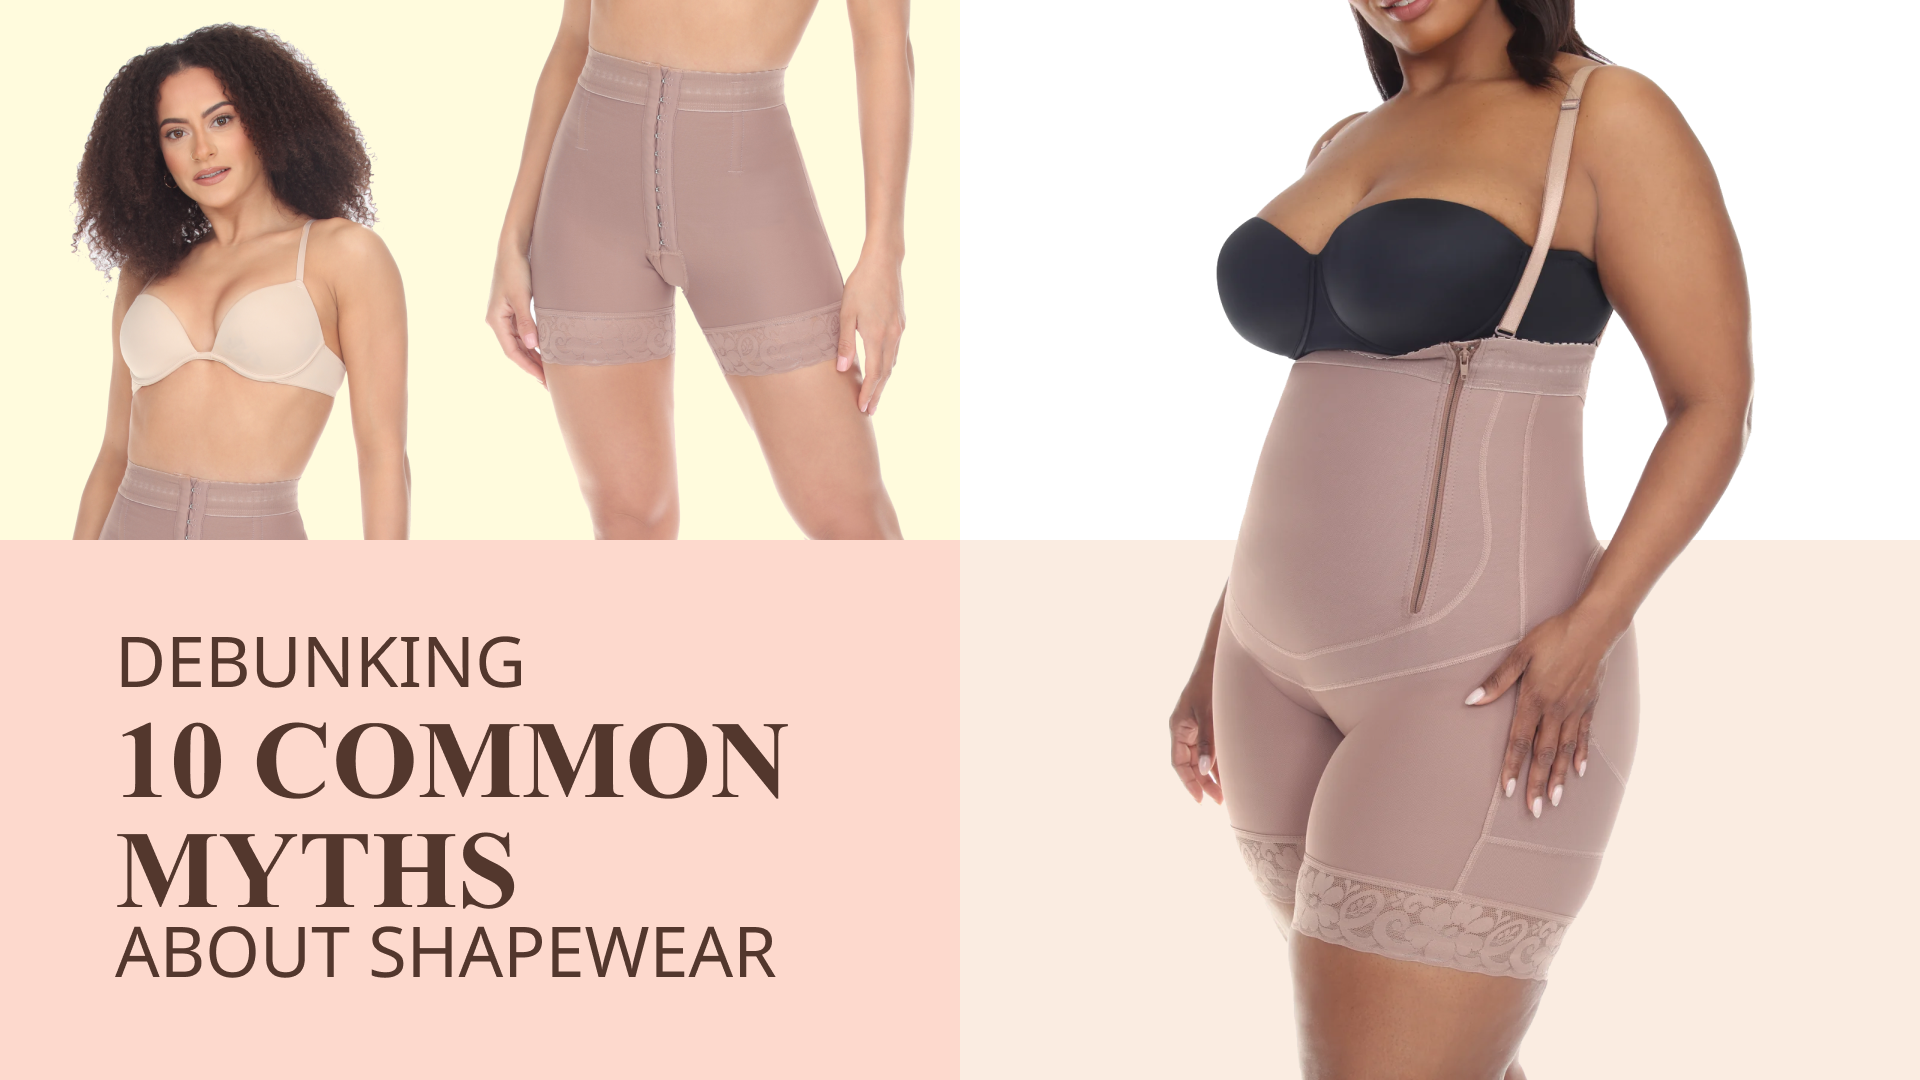 Debunking 10 Common Myths About Shapewear